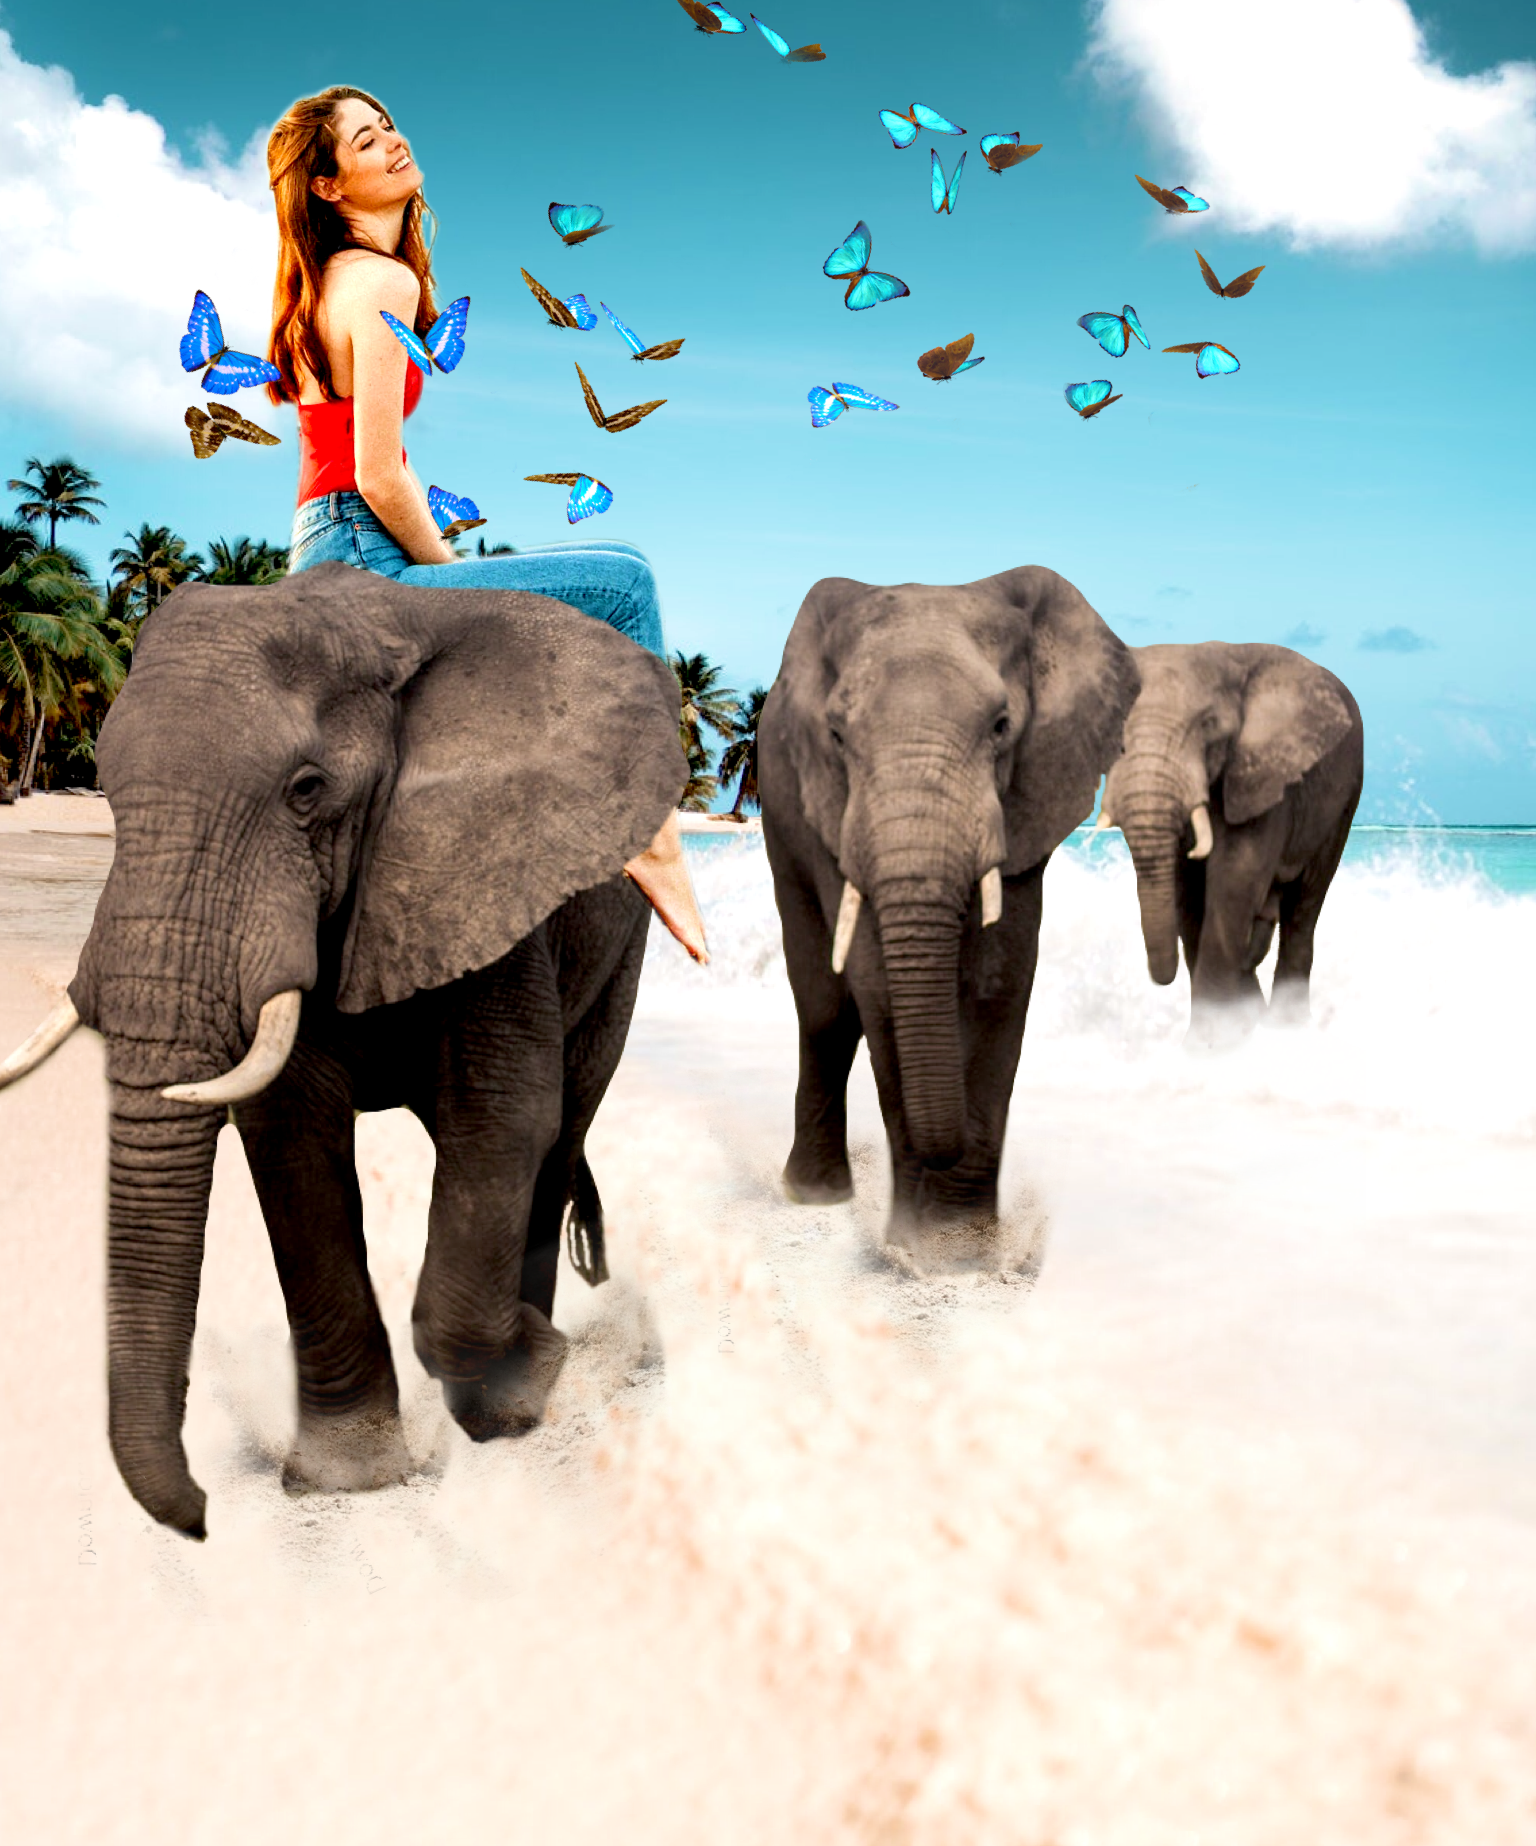 A Woman Riding On The Back Of An Elephant Collage Art Template